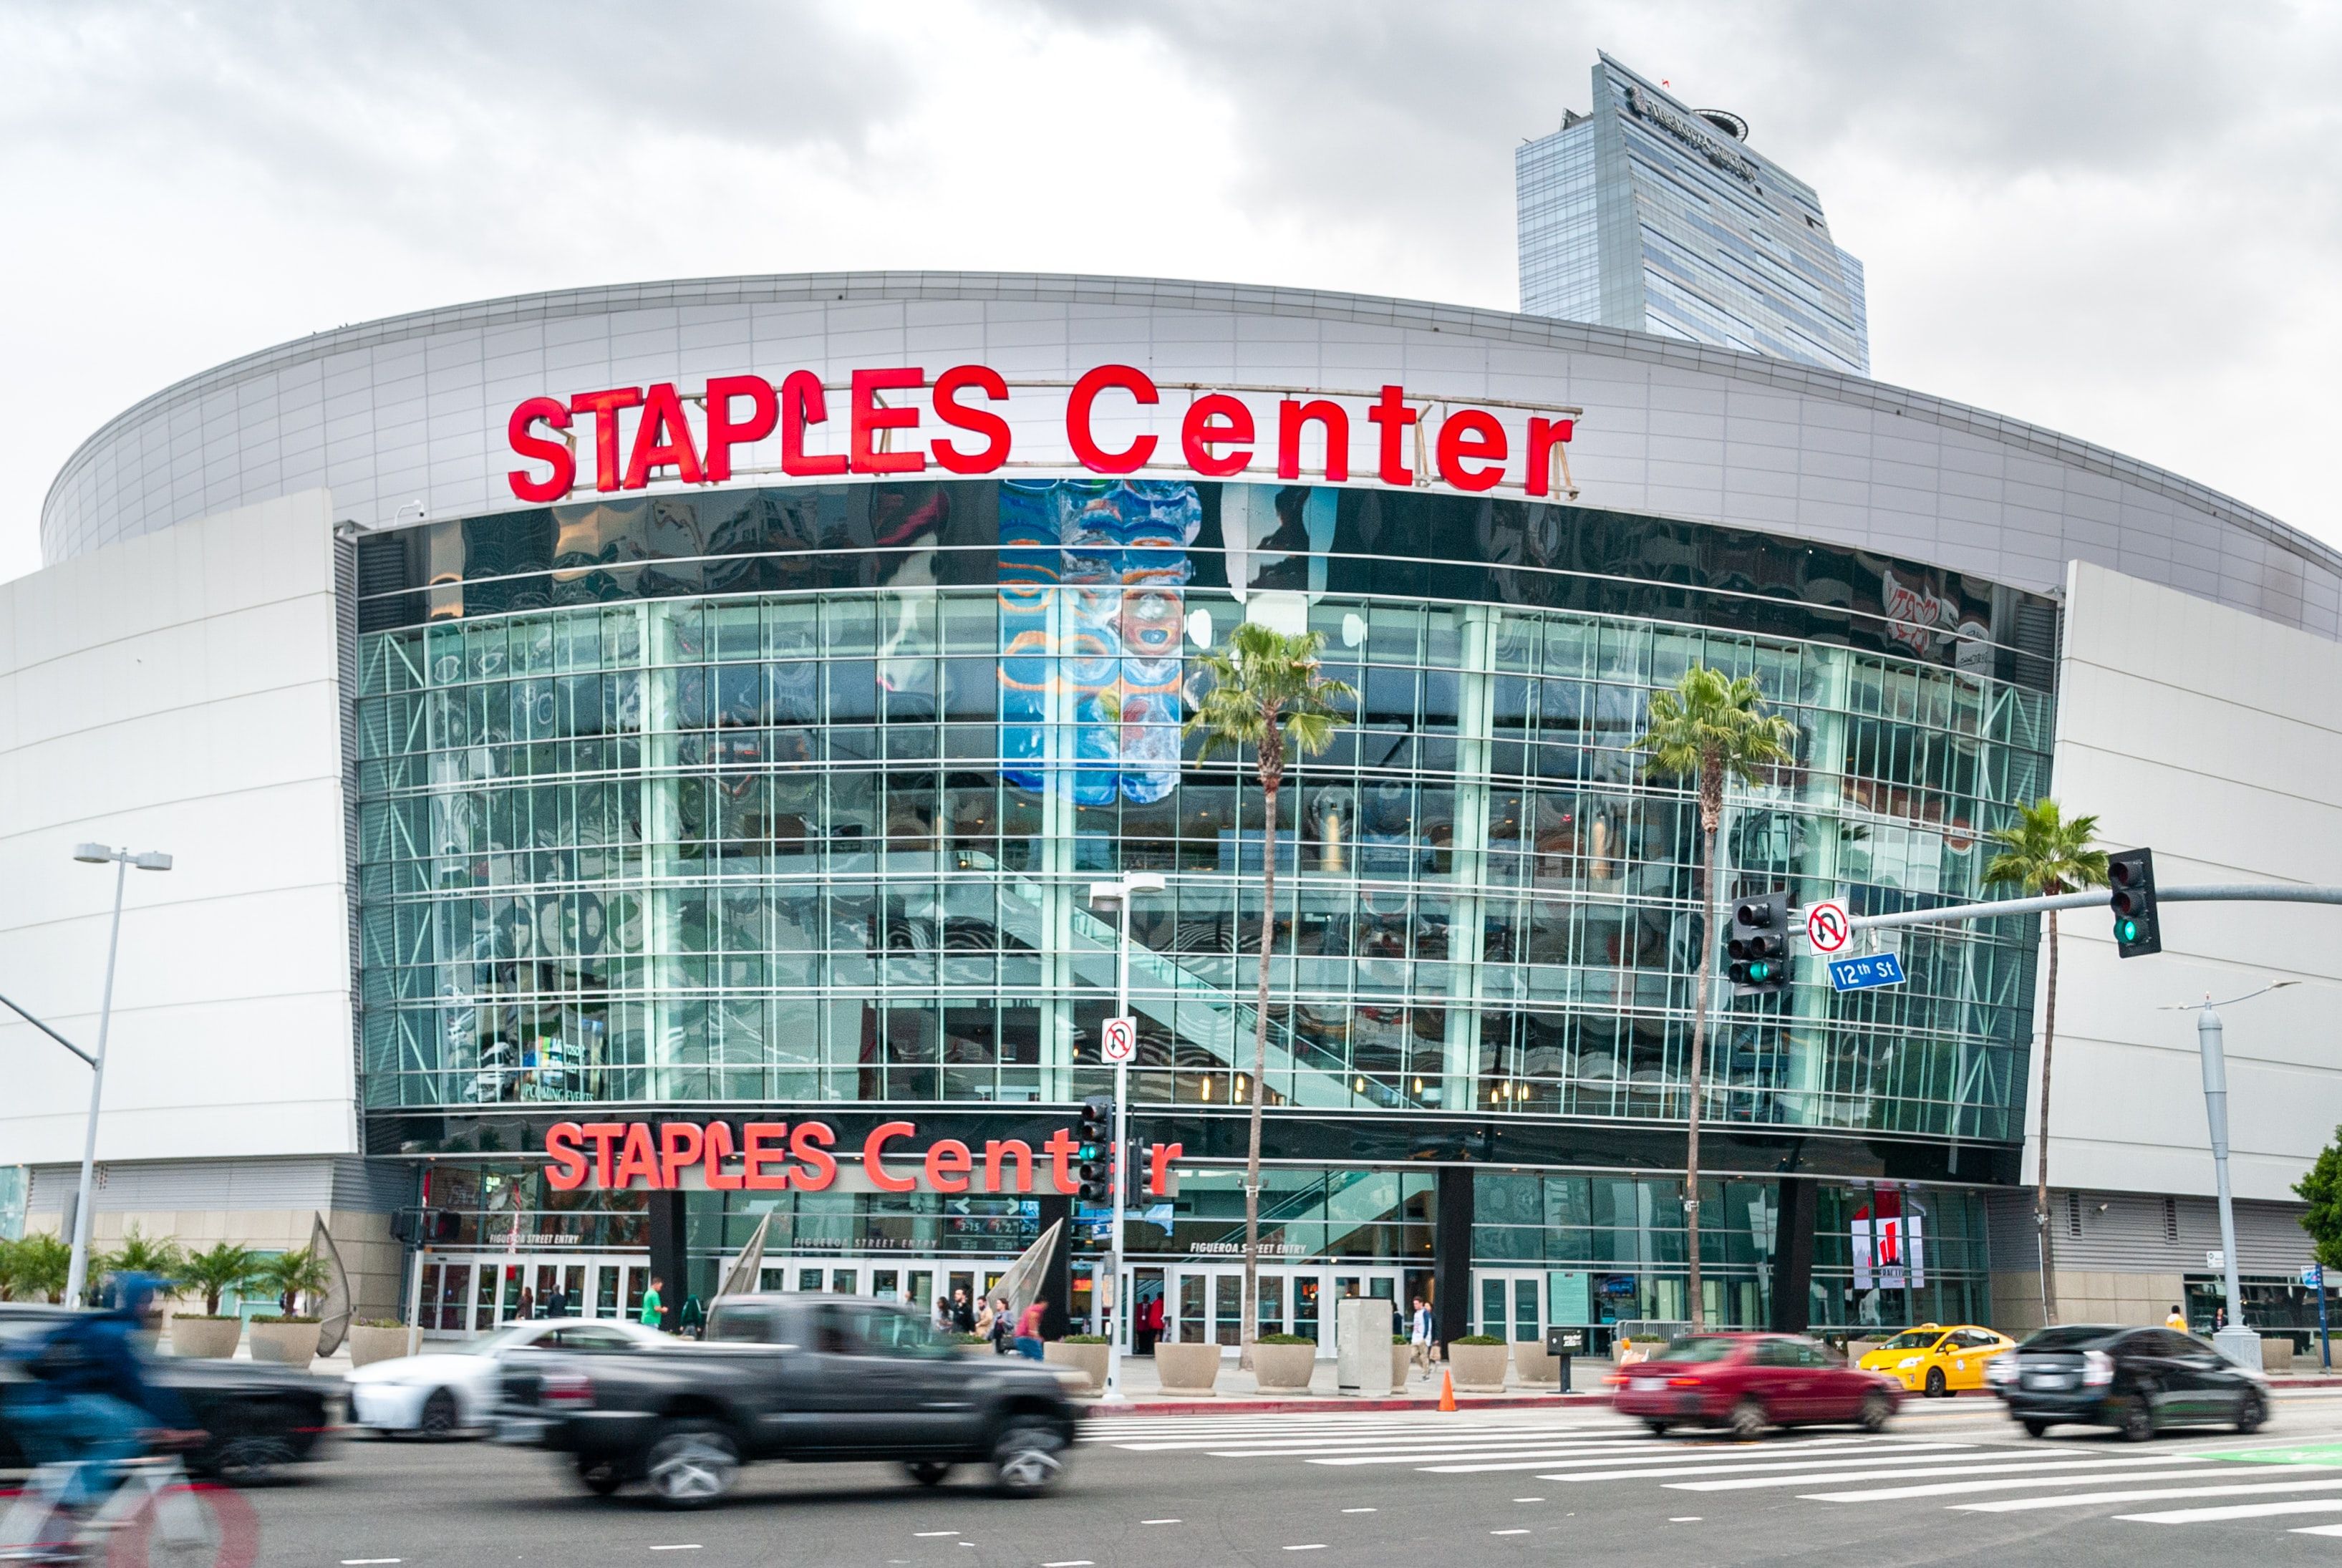 L.A.’s iconic staples center to be renamed as Crypto.com Arena